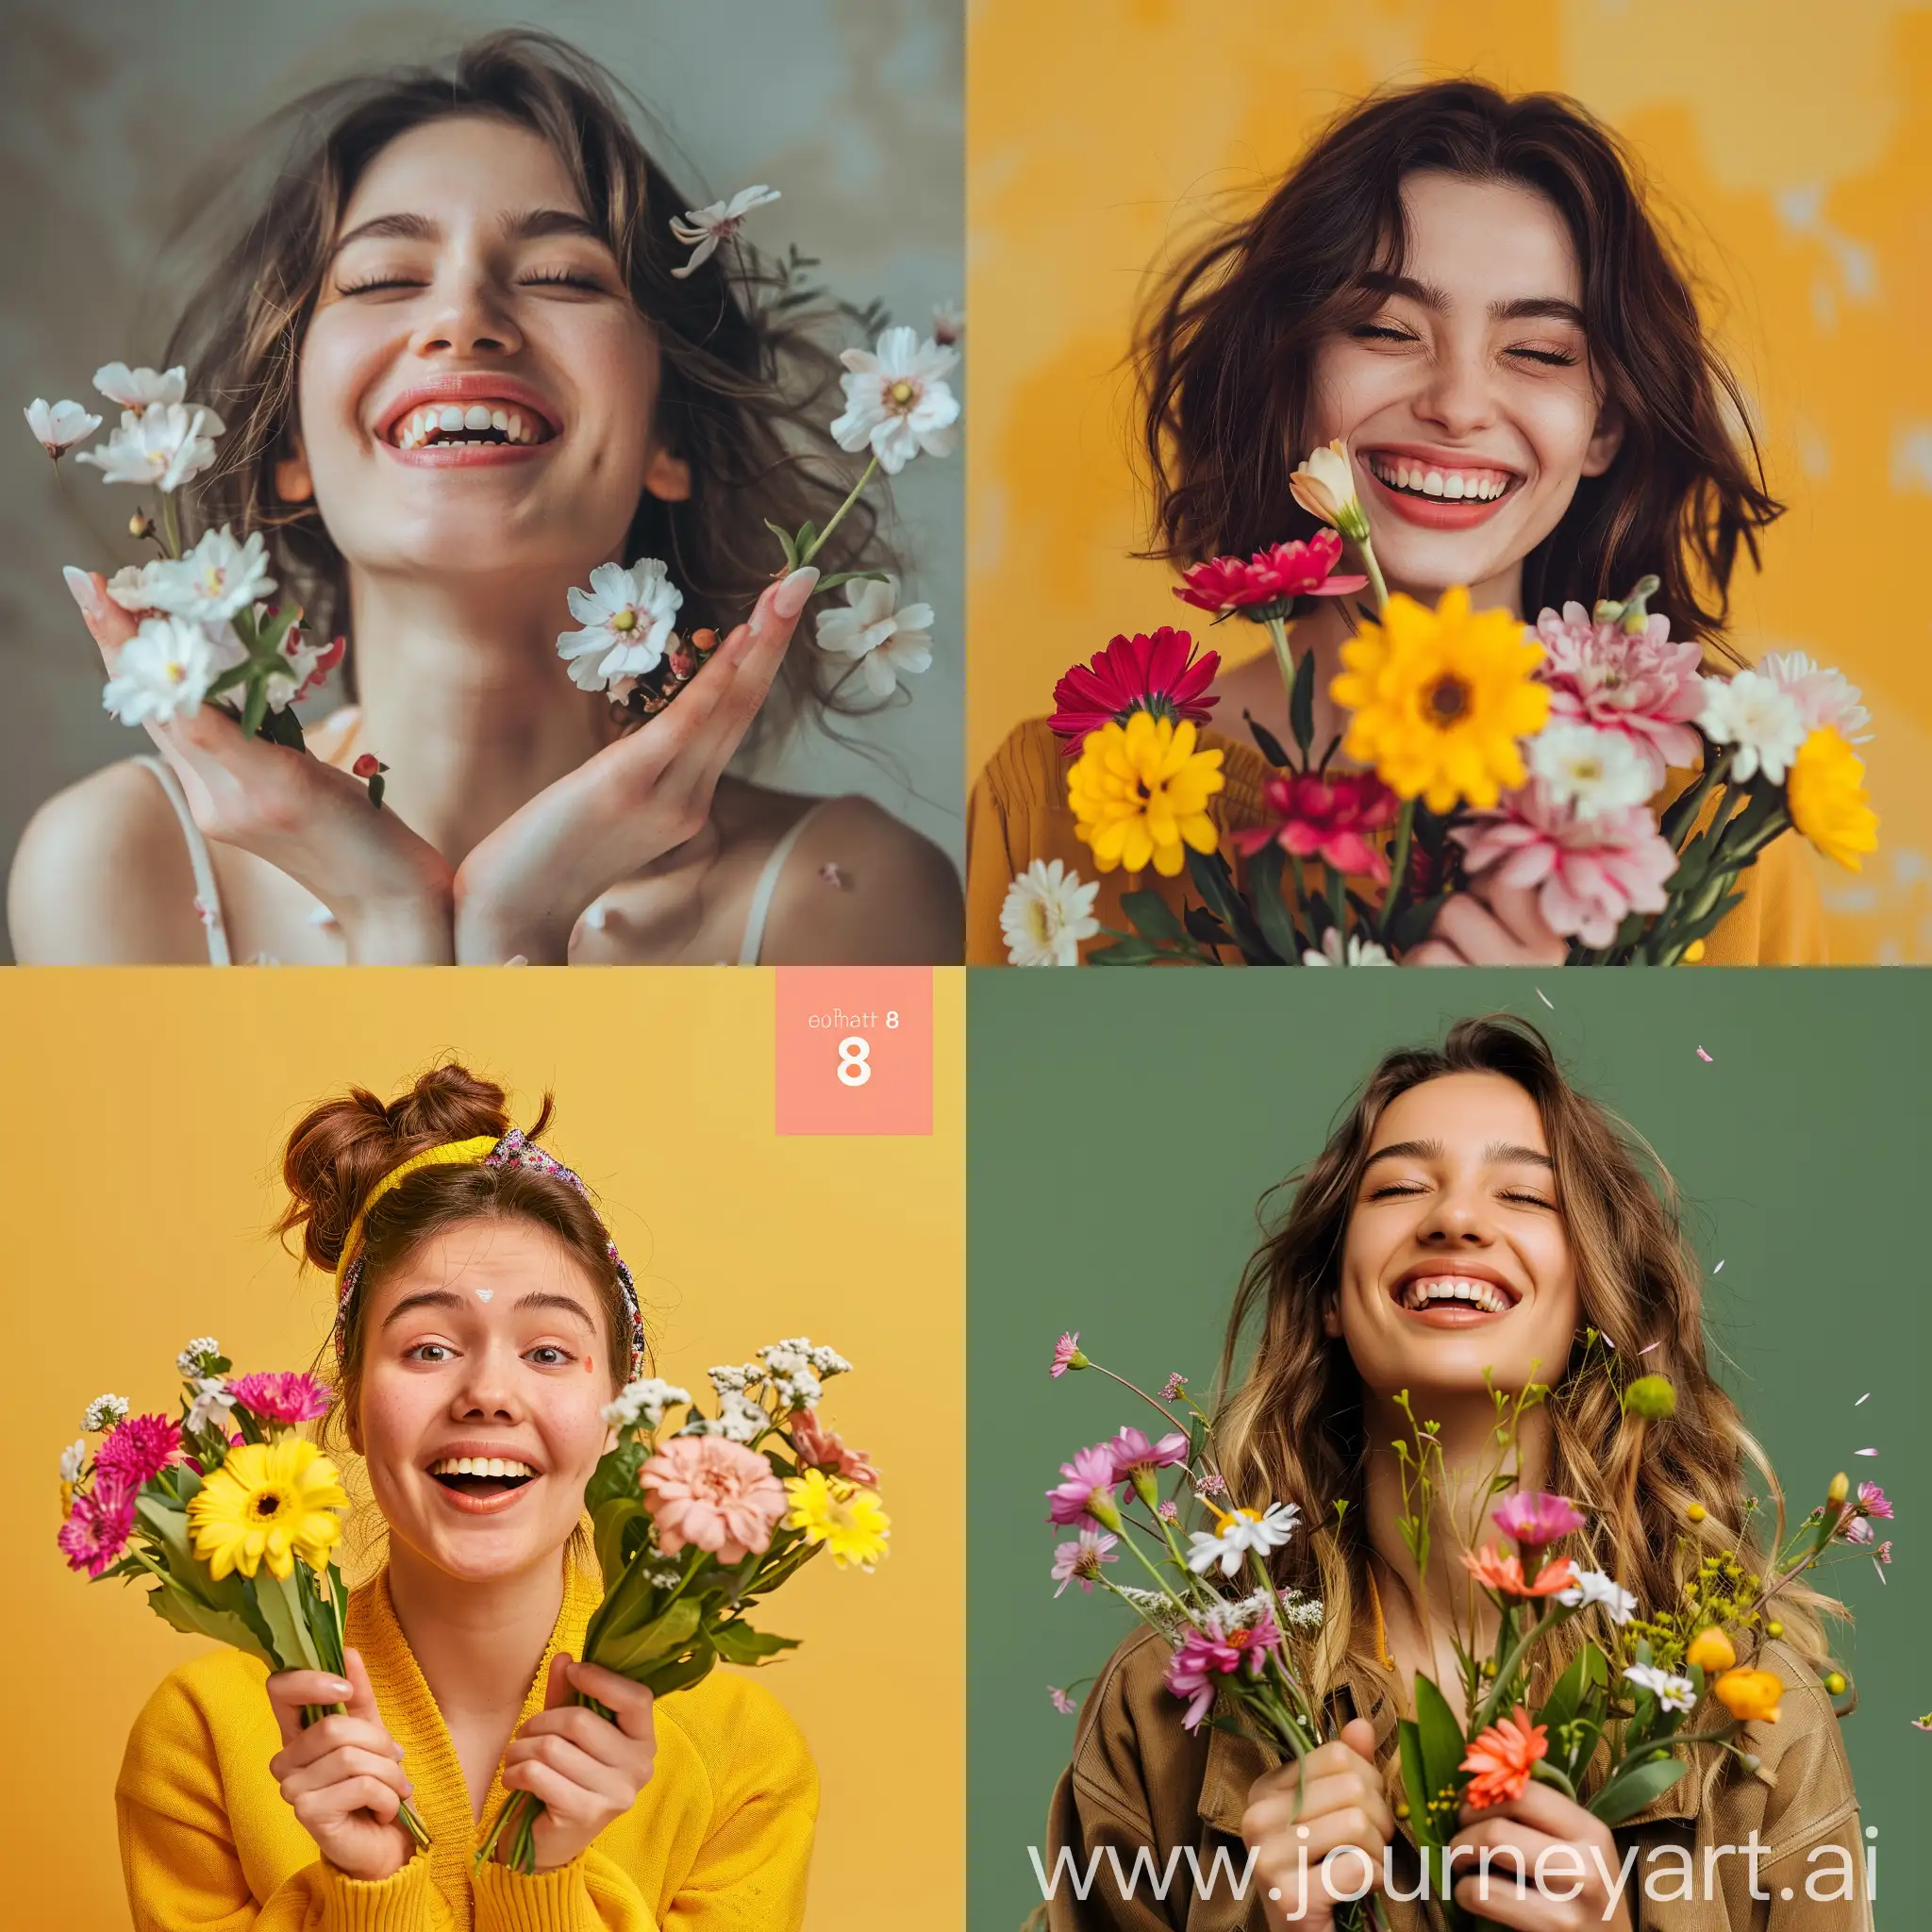 March 8 women's holiday, smiling woman, flowers in hands, great mood, explosion of emotions of high intensity